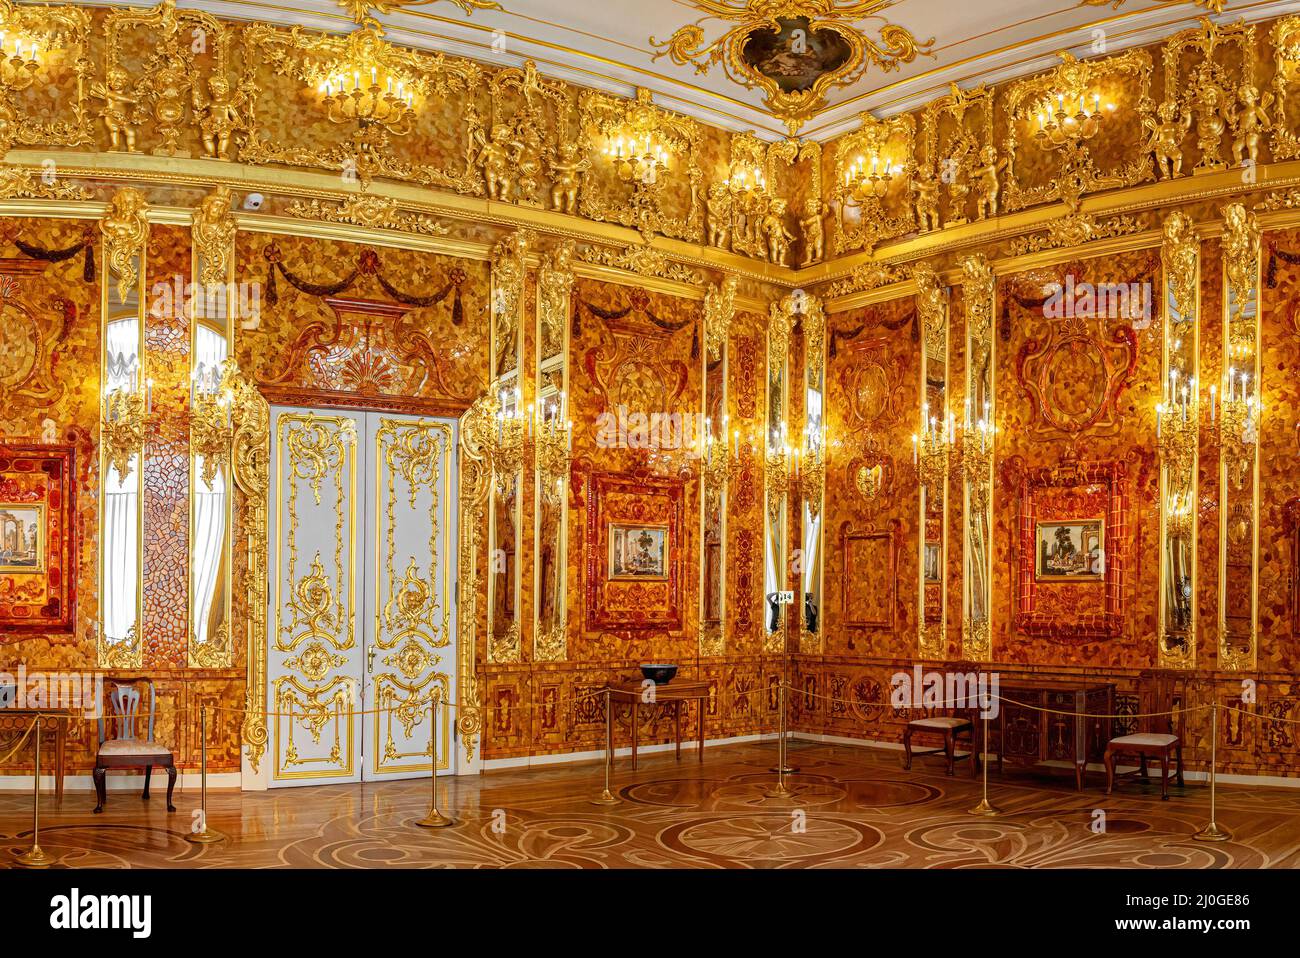 Saint-Petersburg, Russia - March 25 2021: Interior Amber Room, Catherine palace. The former imperial palace. Building is laid in Stock Photo